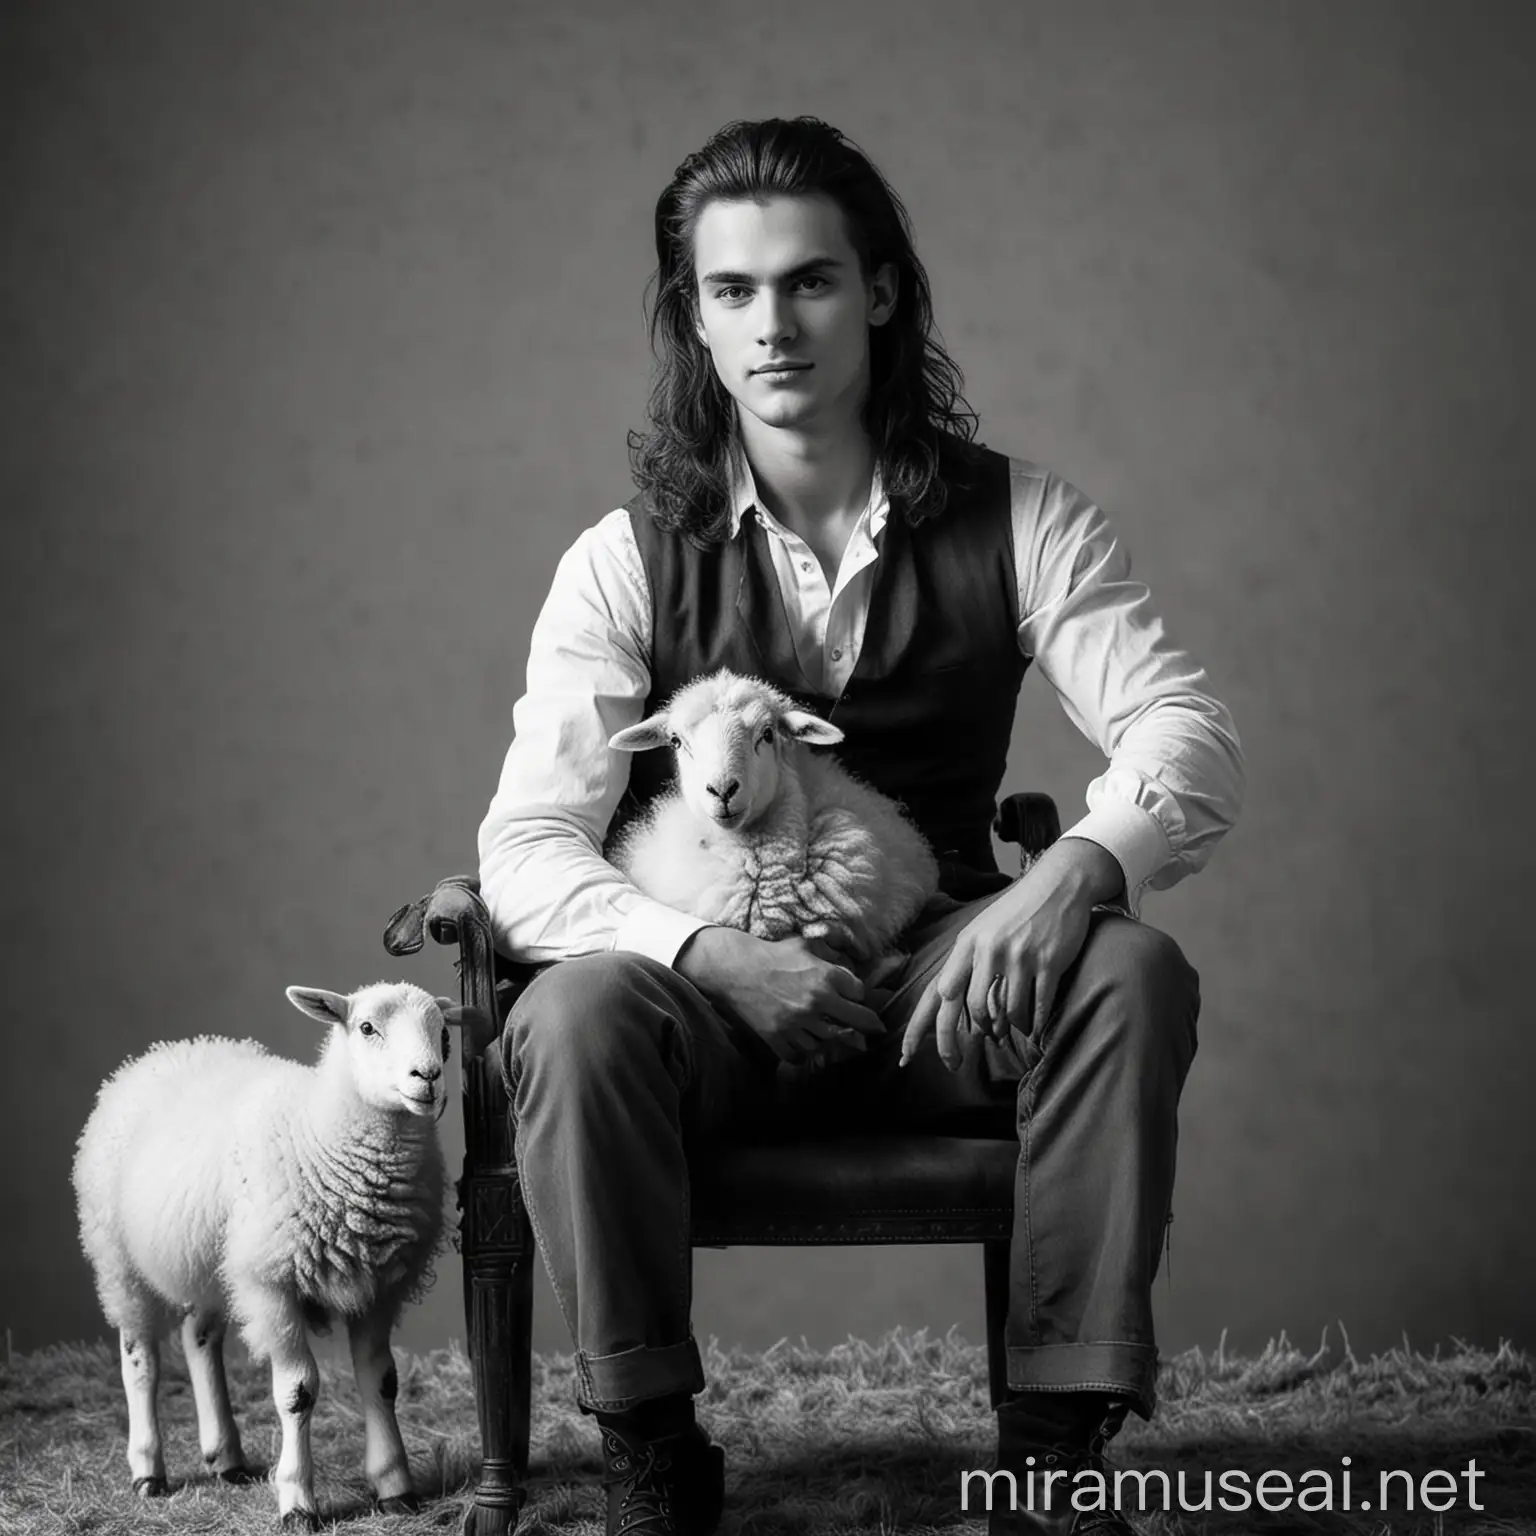 Handsome young man without beard, long hair, sitting on a chair, with sheep around his feet, black and white photo